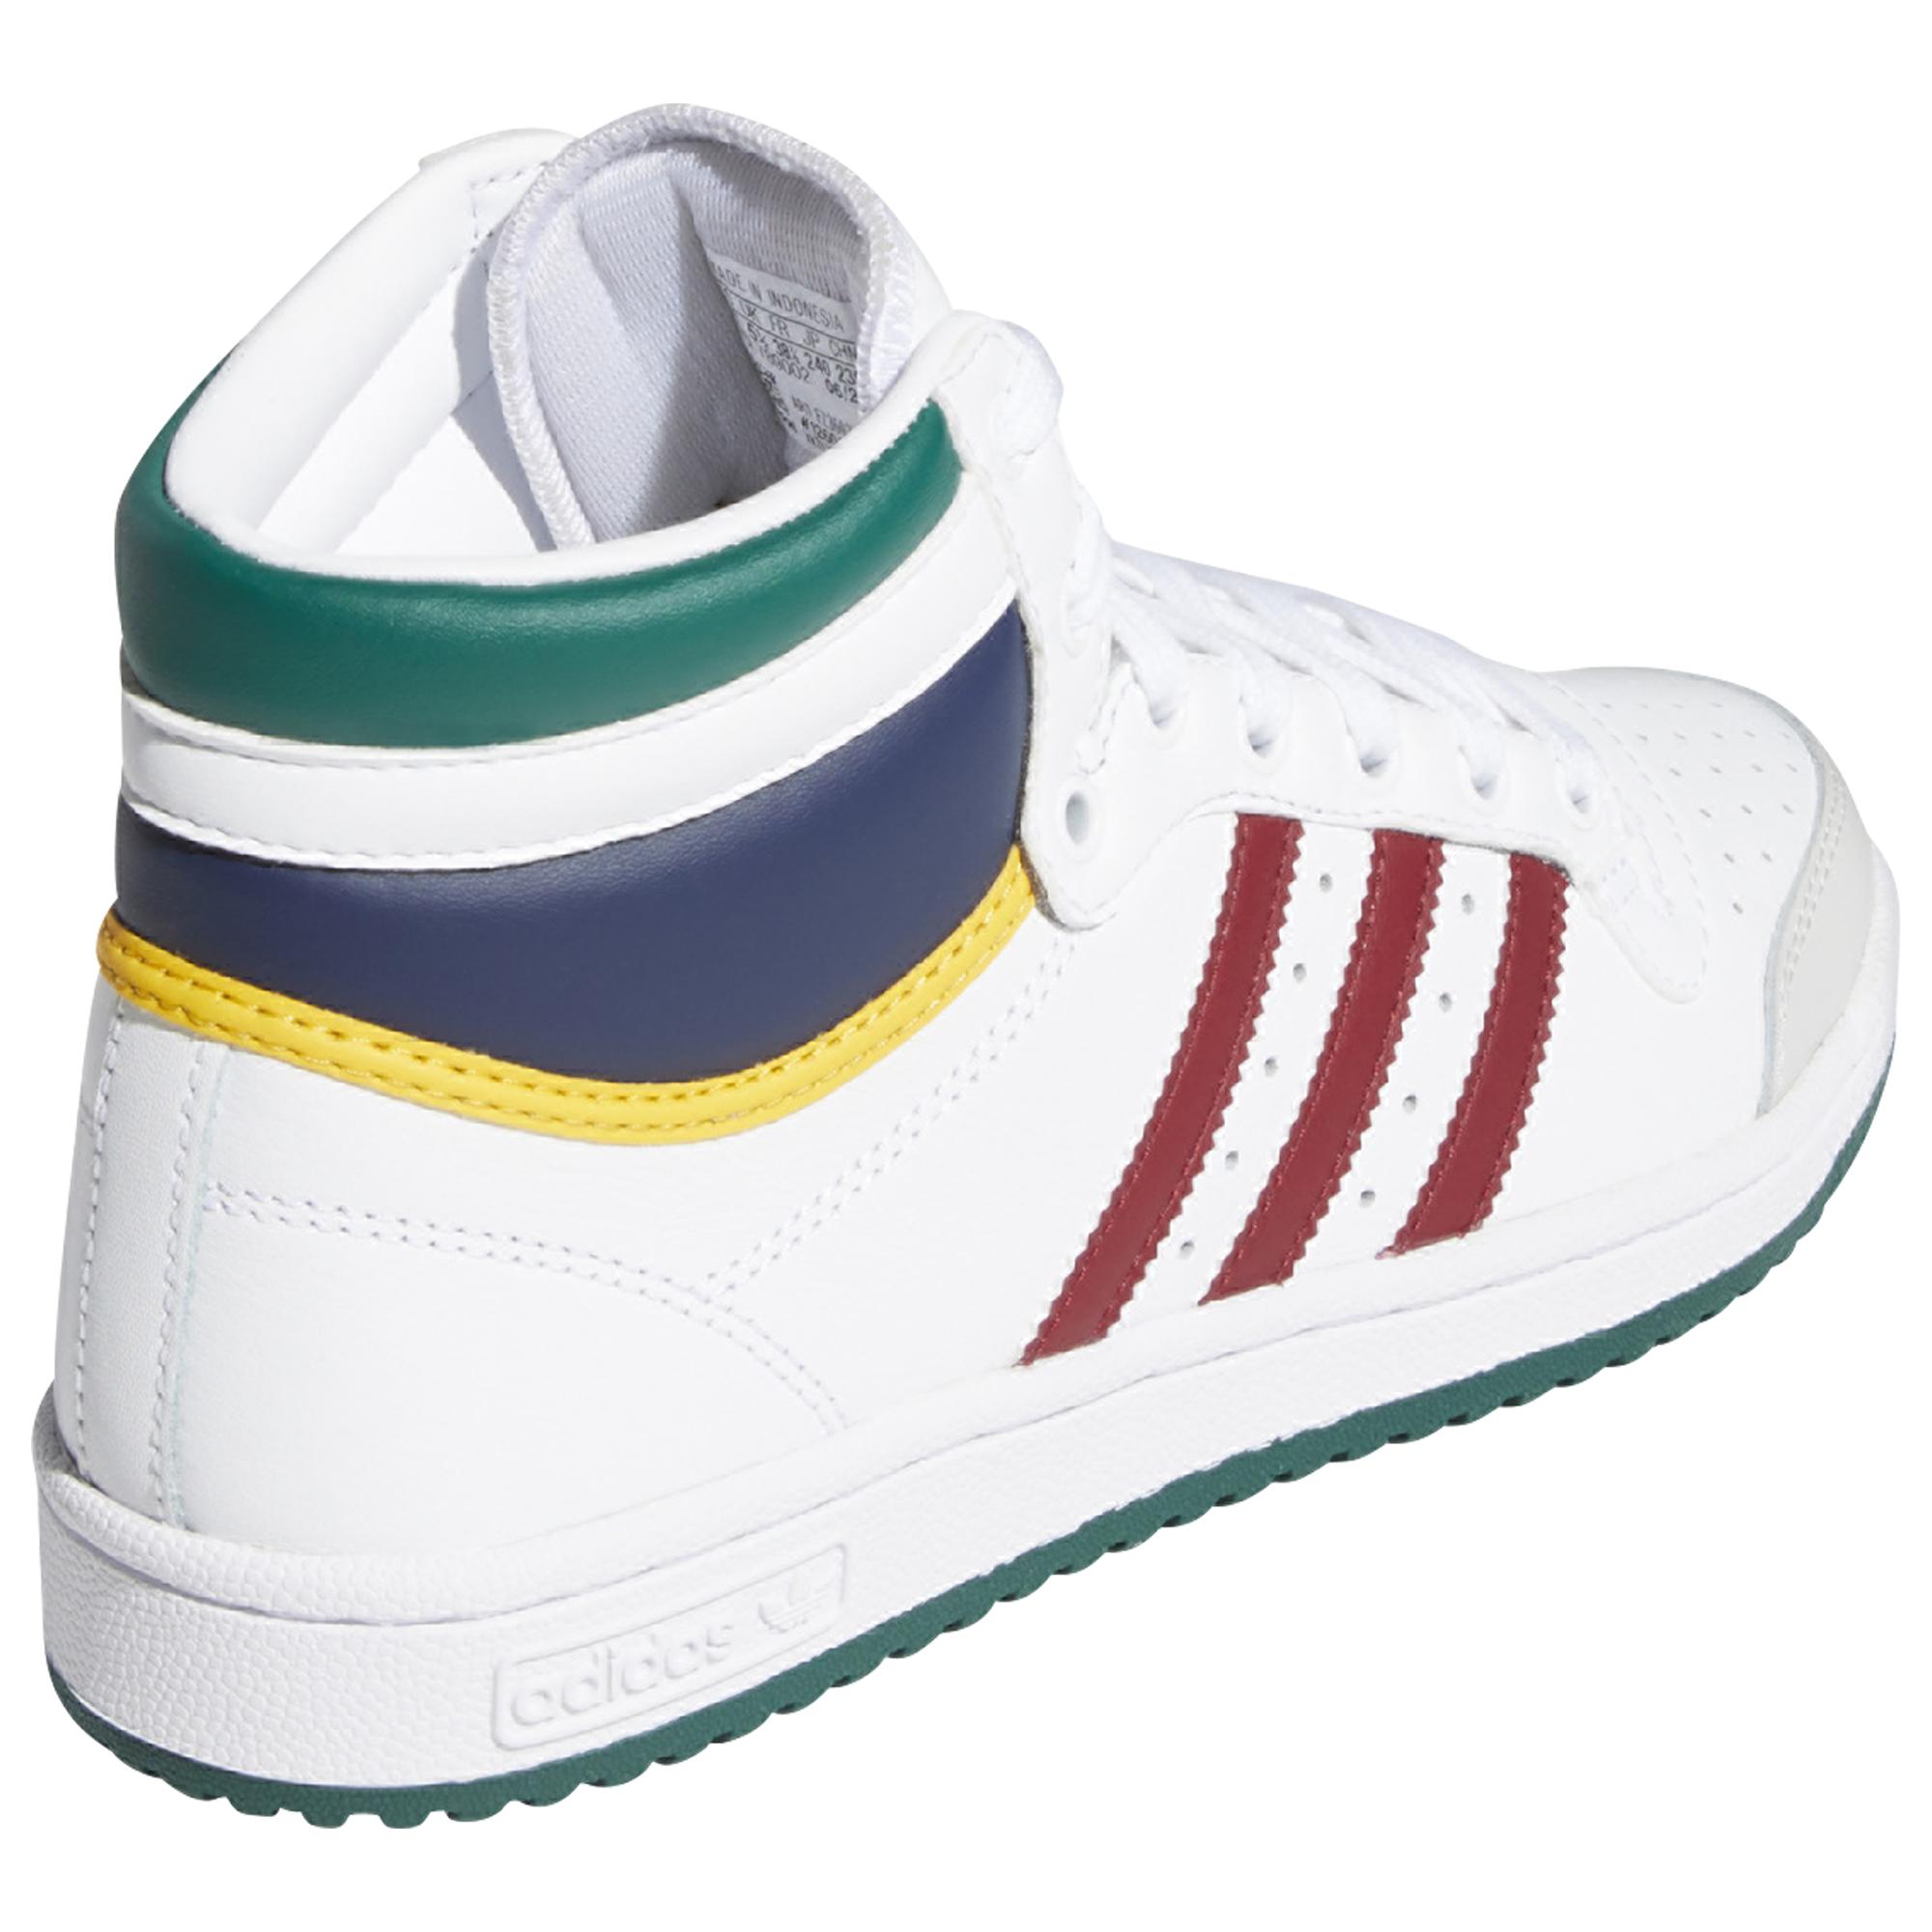 adidas Leather Top Ten Hi - Shoes in White/Maroon/Green (White) - Lyst